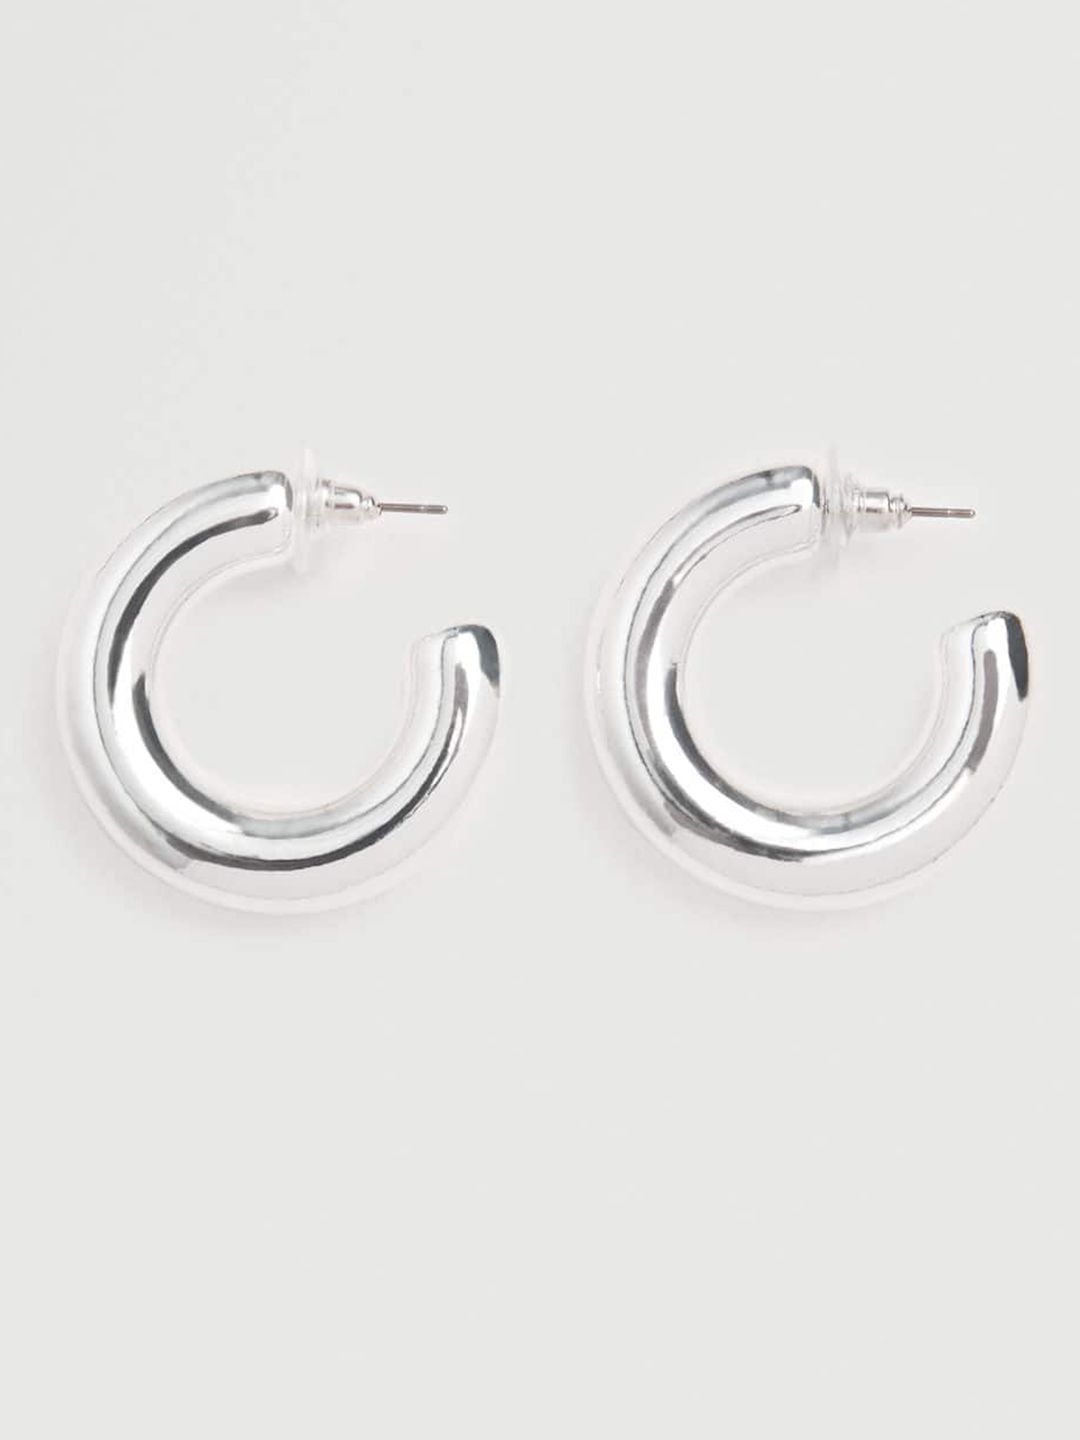 MANGO Silver-Toned Crescent Shaped Half Hoop Earrings Price in India